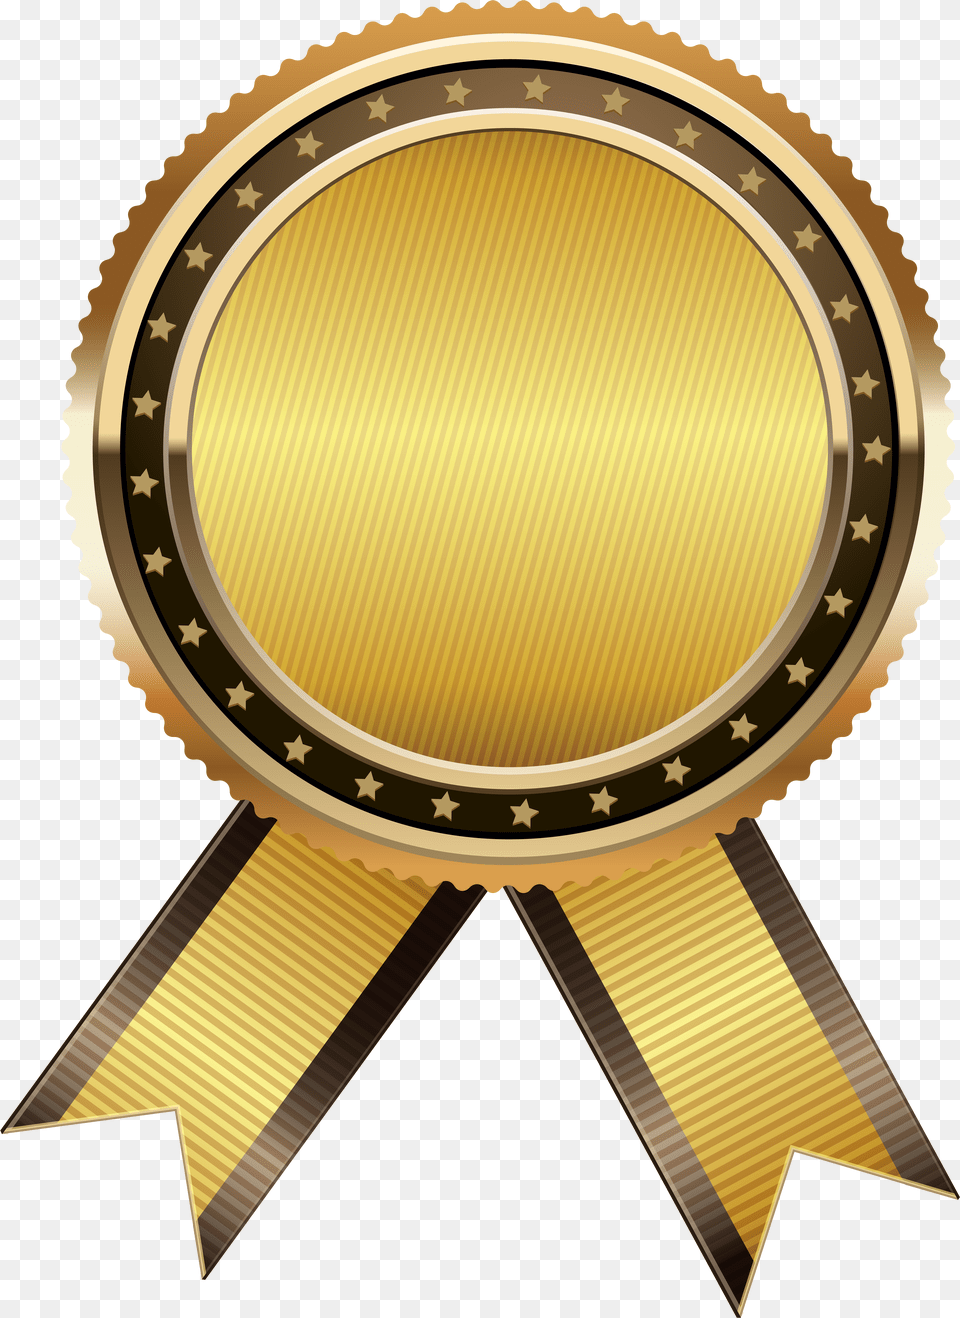 Gold Seal Free Clip Art Image Gold Seal With Ribbon Png